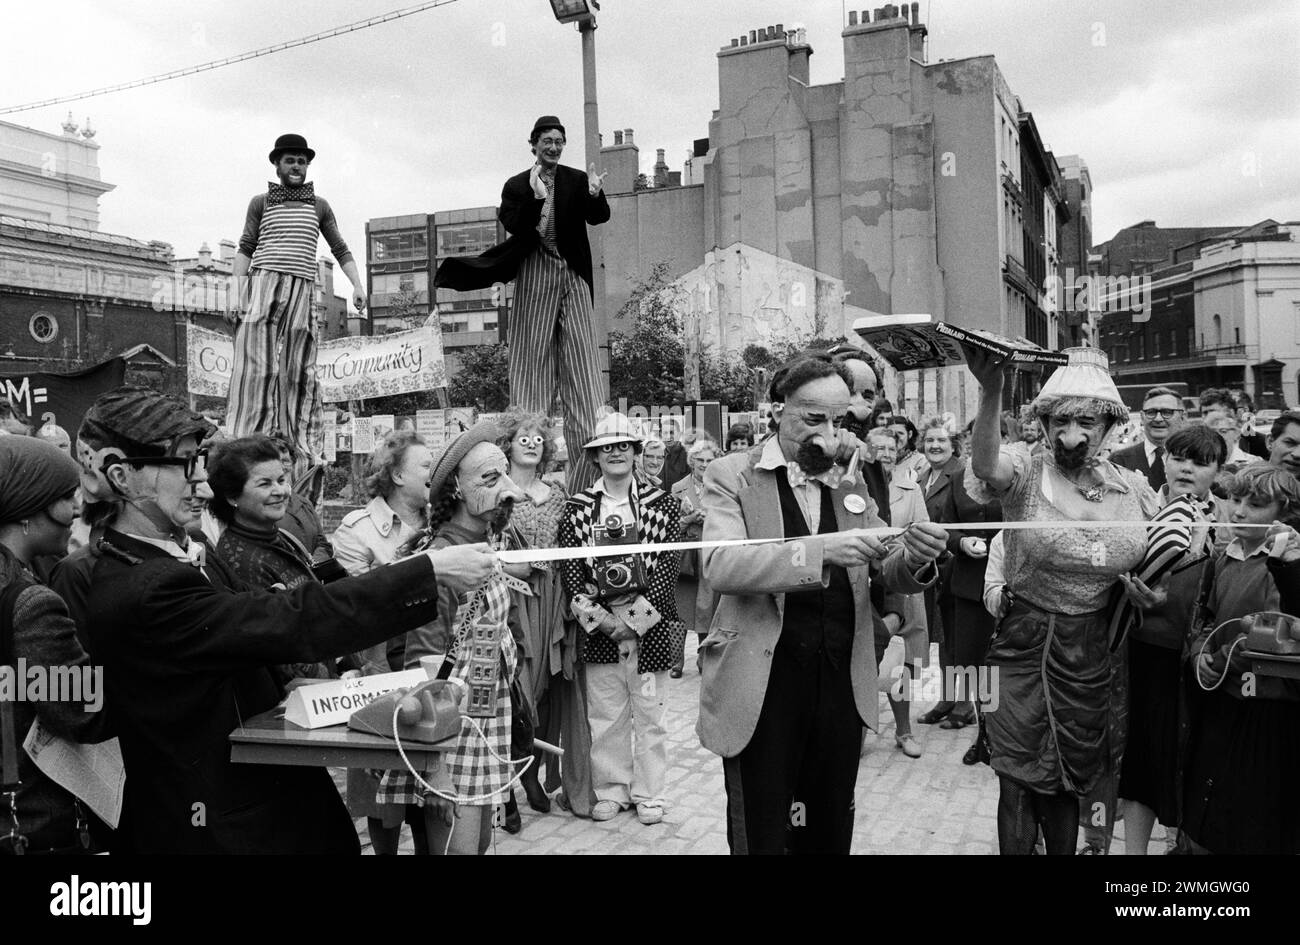 London 1980s protest. Opening of the new Covent Garden Piazza London by street artists from the Covent Garden Community Association wearing Sir Horace Cutler face masks, cutting the tape, the opening ceremony spoof tape. 19th June 1980. England UK 1980 1980s HOMER SYKES Stock Photo